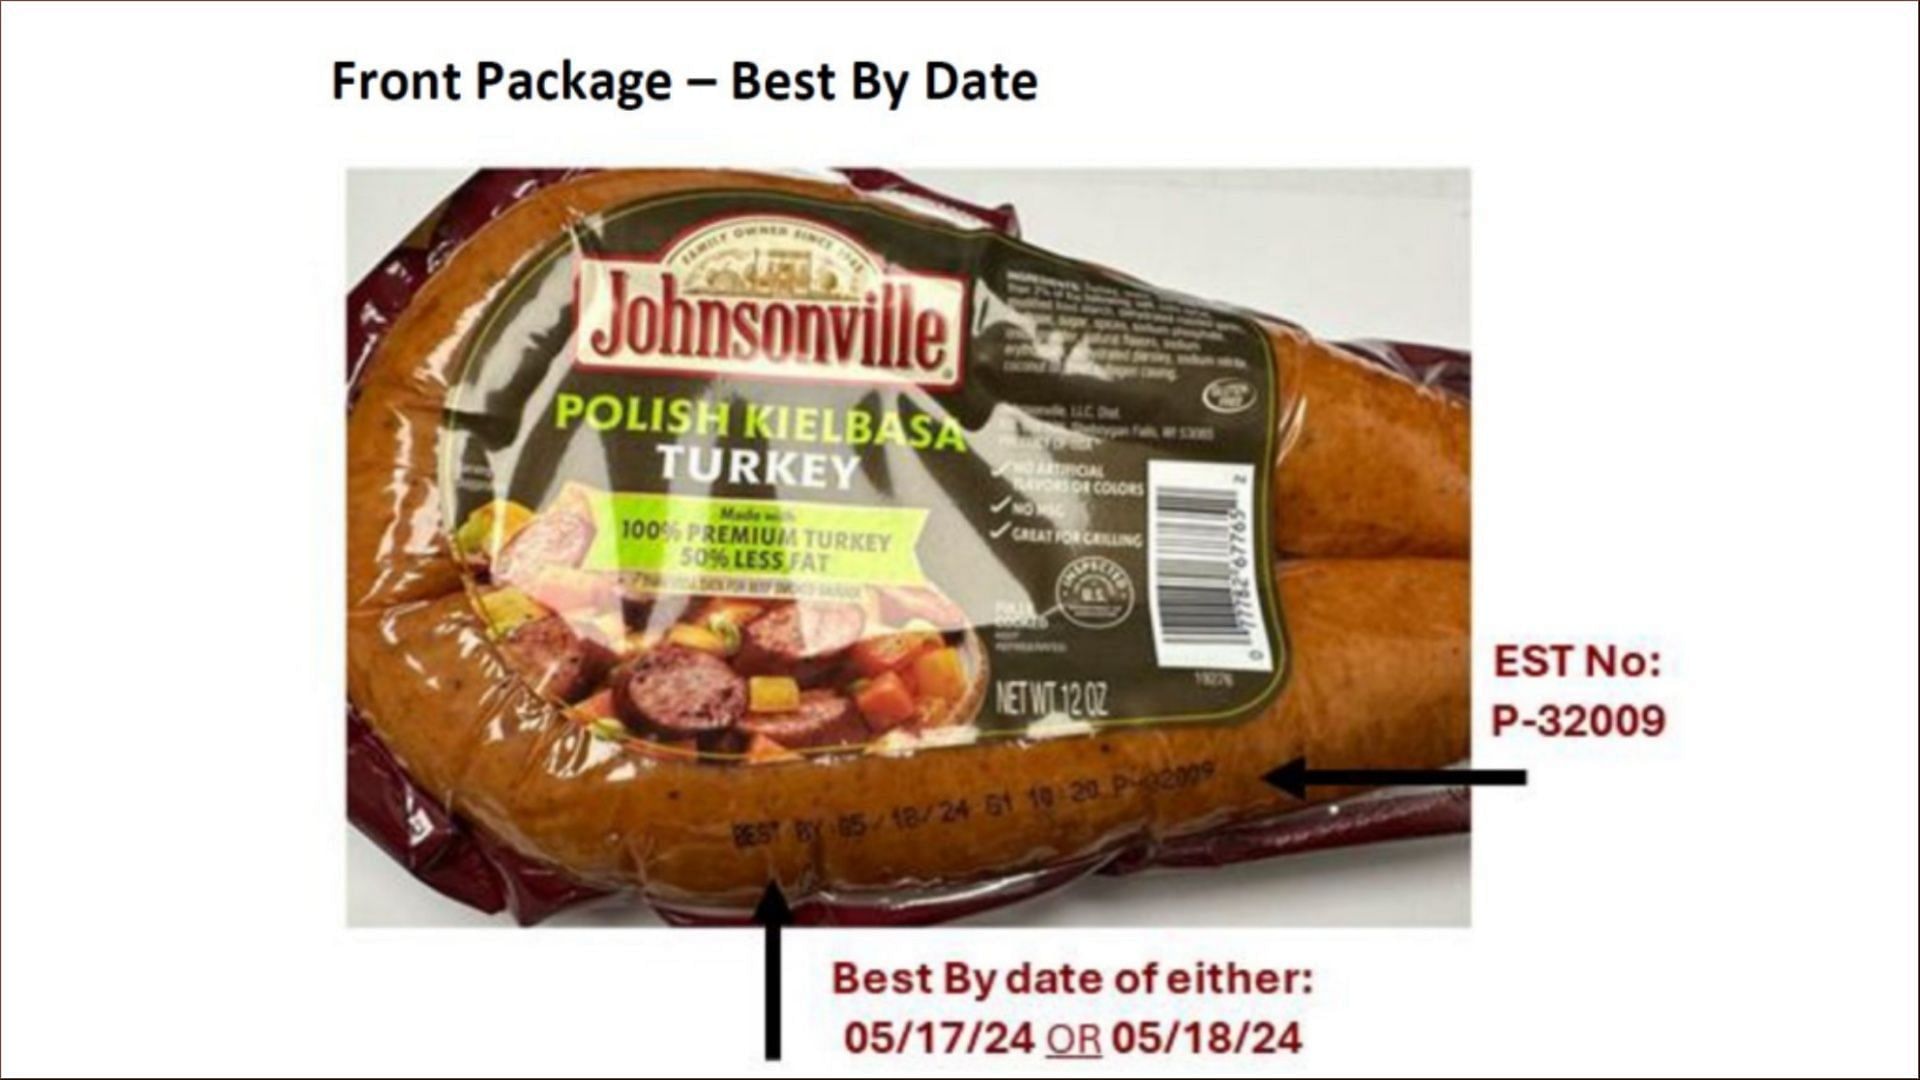 The Johnsonville turkey kielbasa sausage products contain pieces of rubber (Image via FSIS)